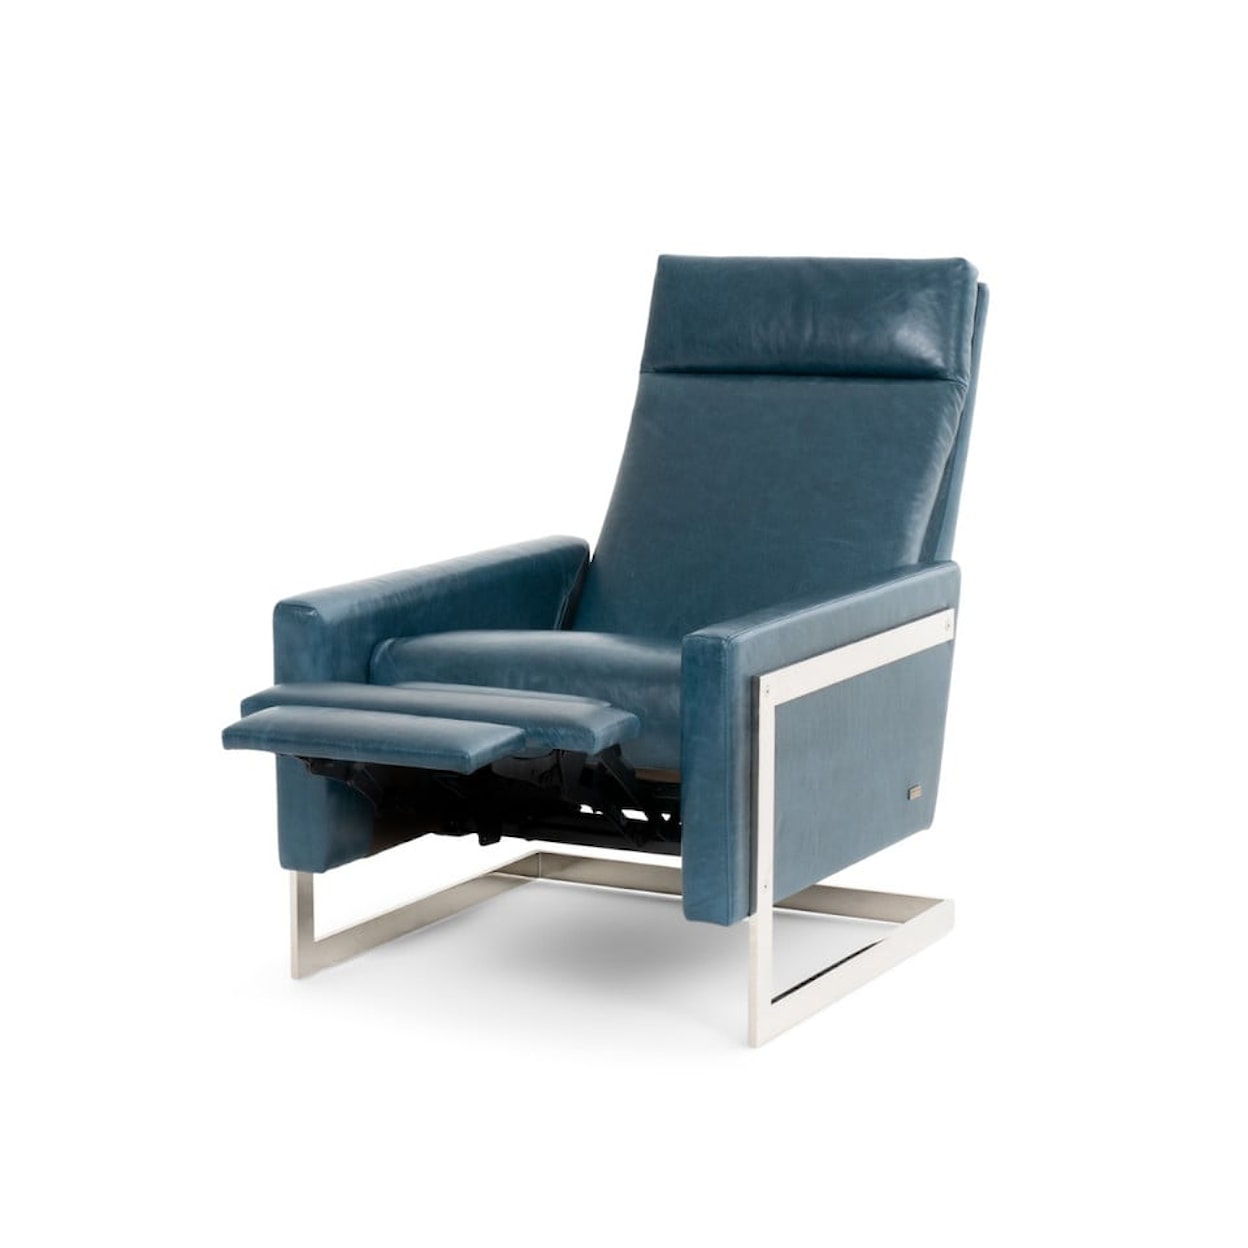 American Leather Re-Invented Recliner Re-Invented Isla Recliner